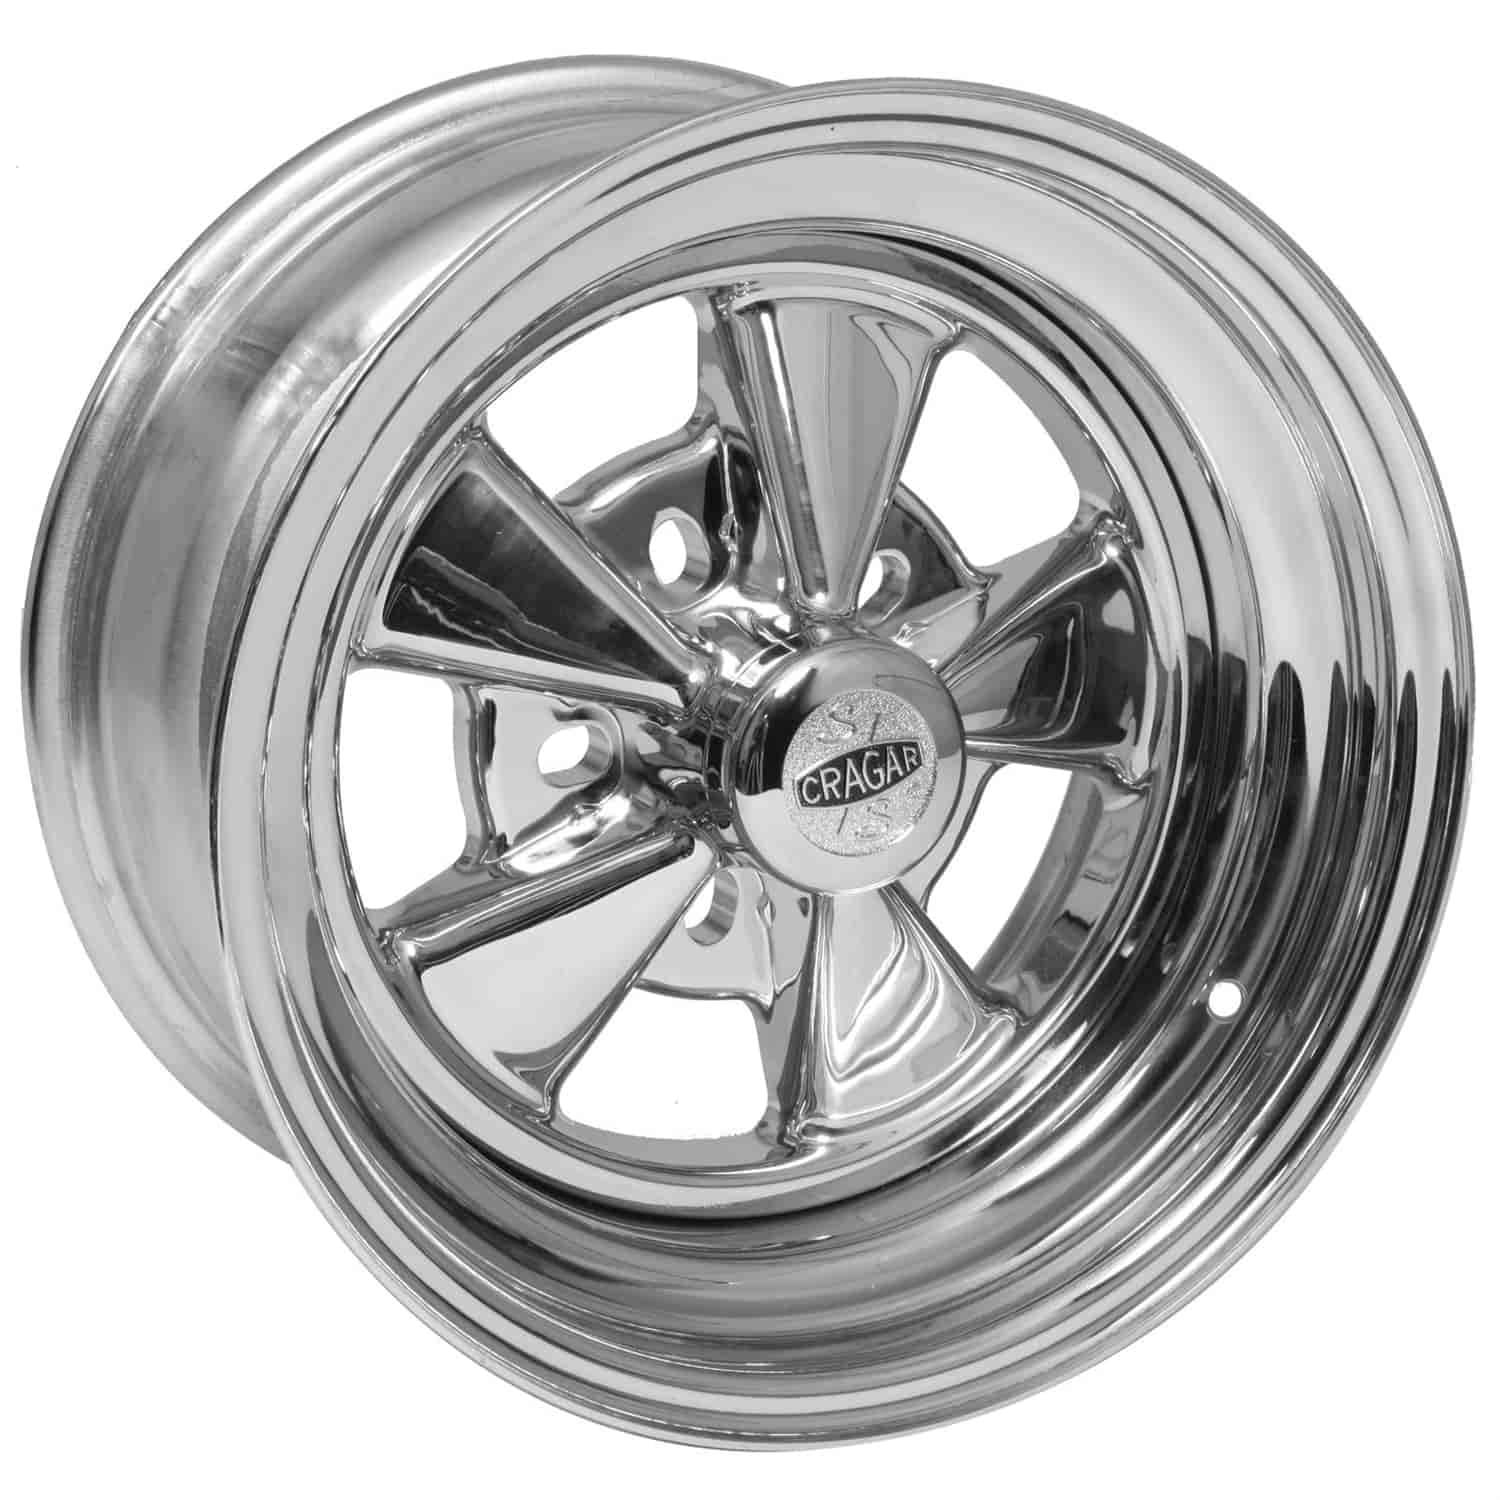 S/S 15X8 5-4.75 4 RS